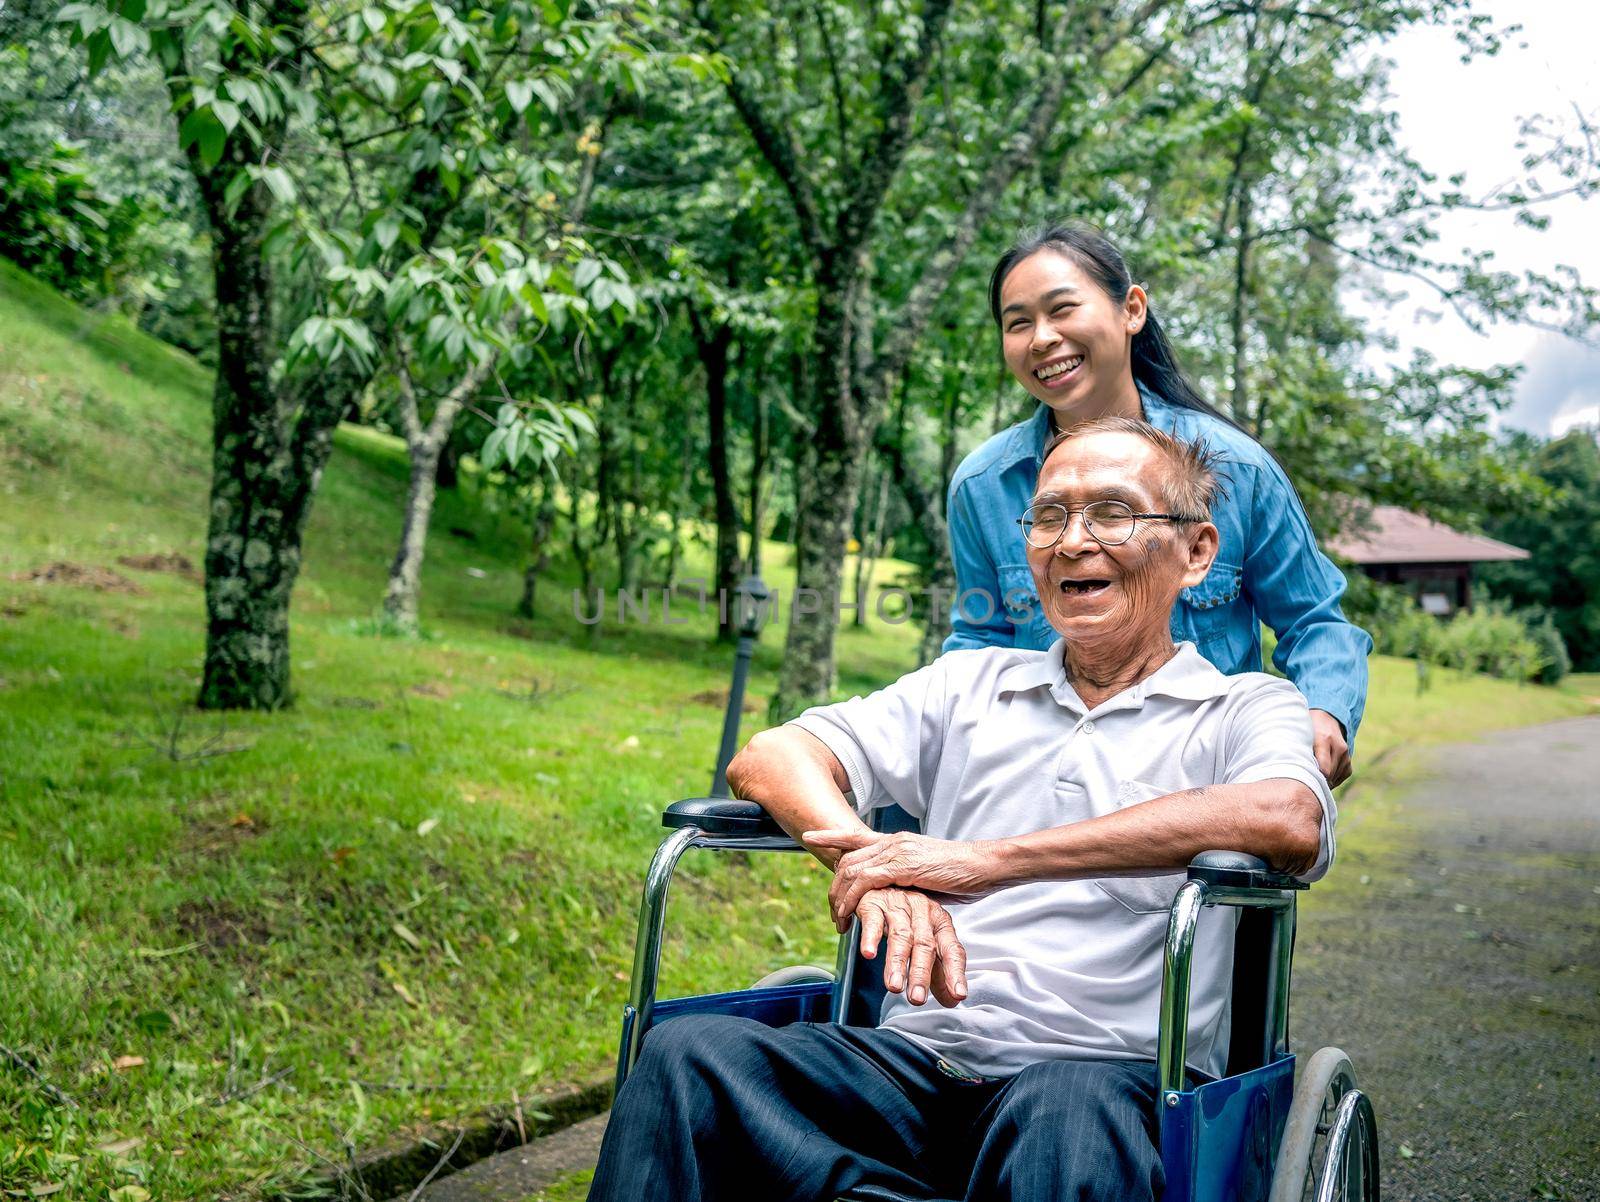 Grandfather in a wheelchair with granddaughter enjoying nature in the park. Family life on vacation. by TEERASAK